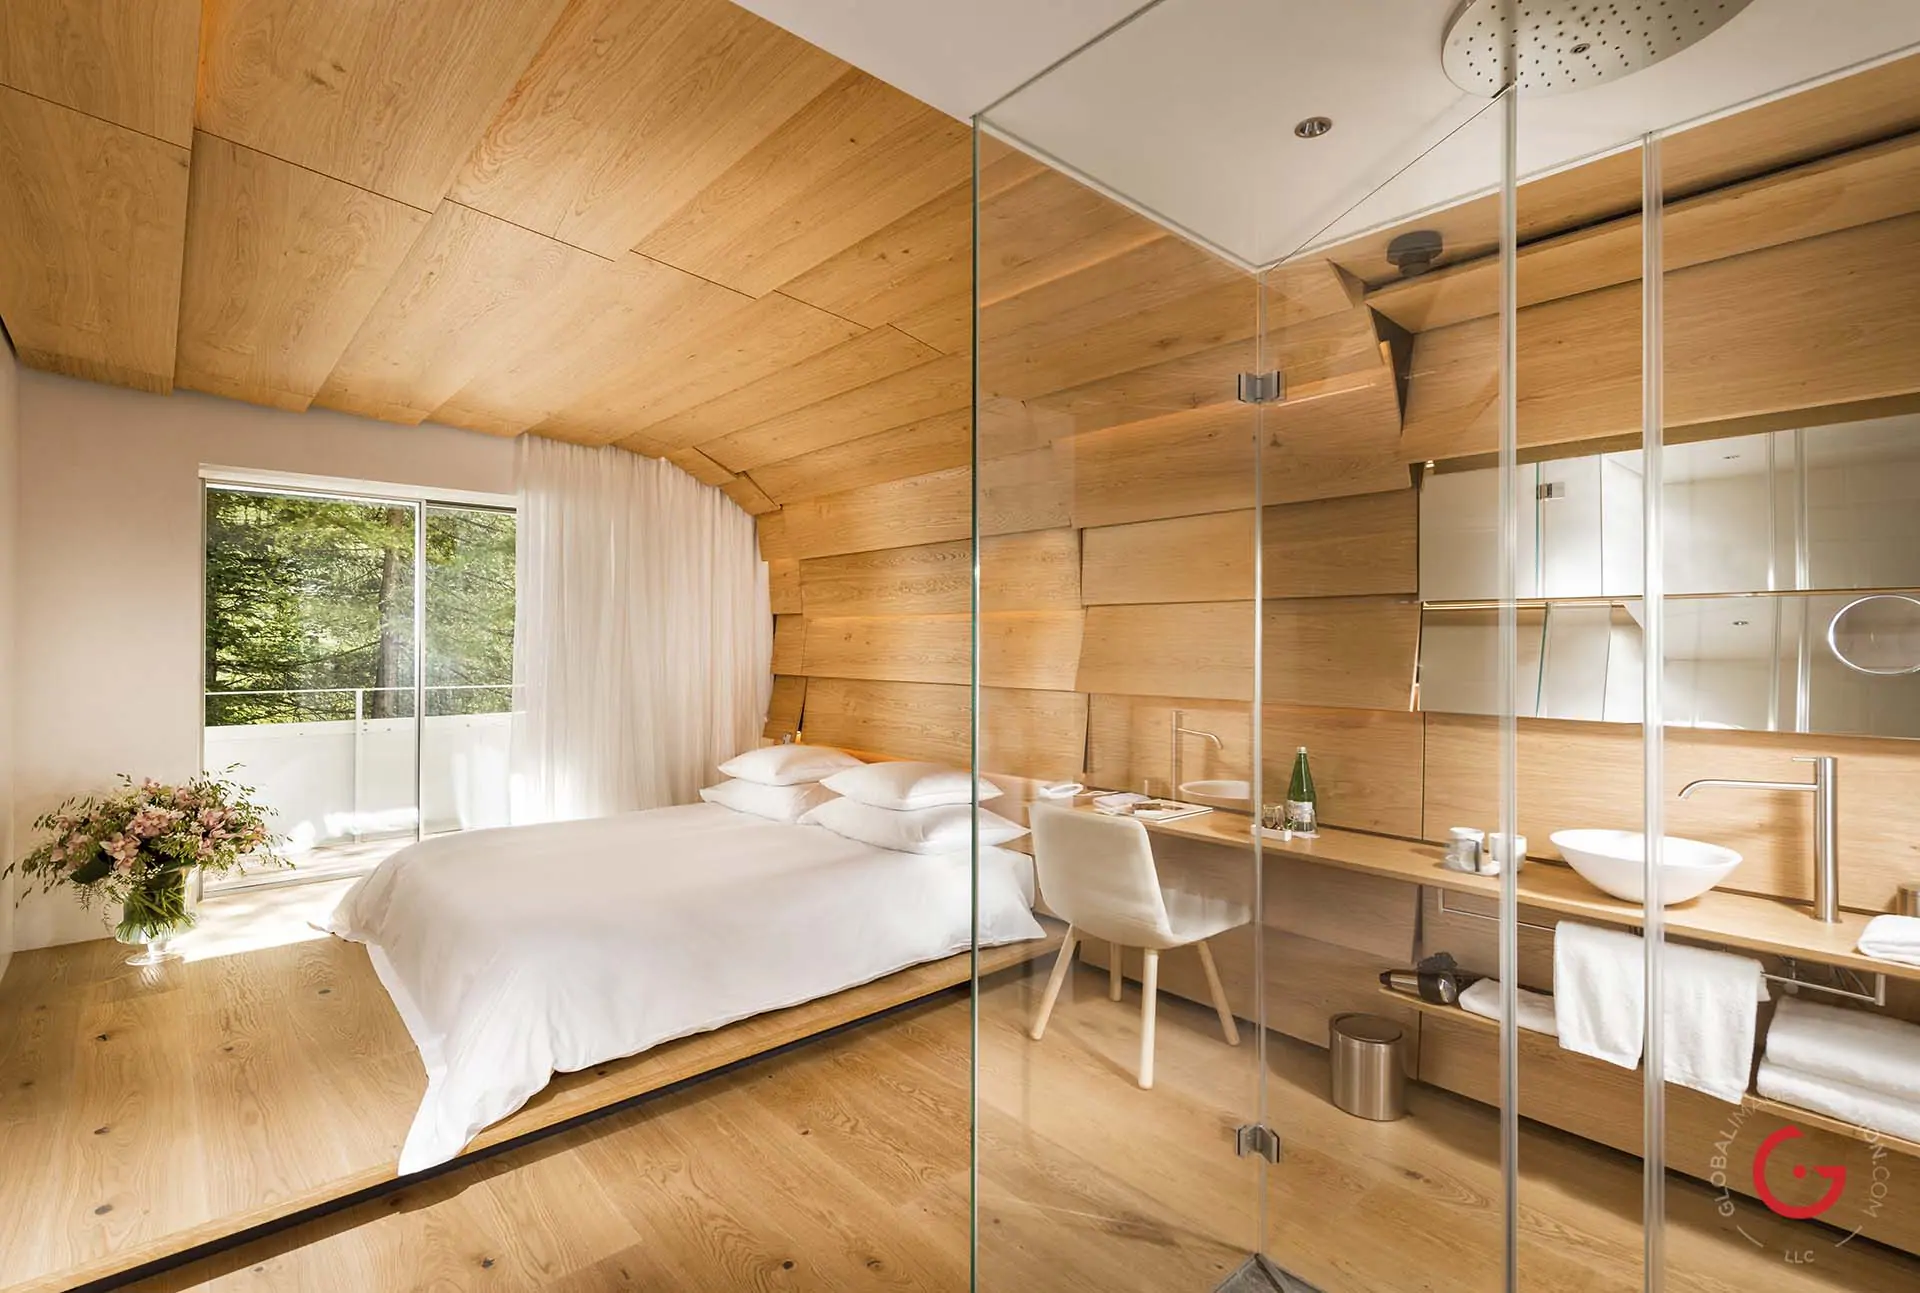 Kengo Kuma room at 7132 House of Architects - Professional Architecture Photographer and Commercial Photography of Buildings